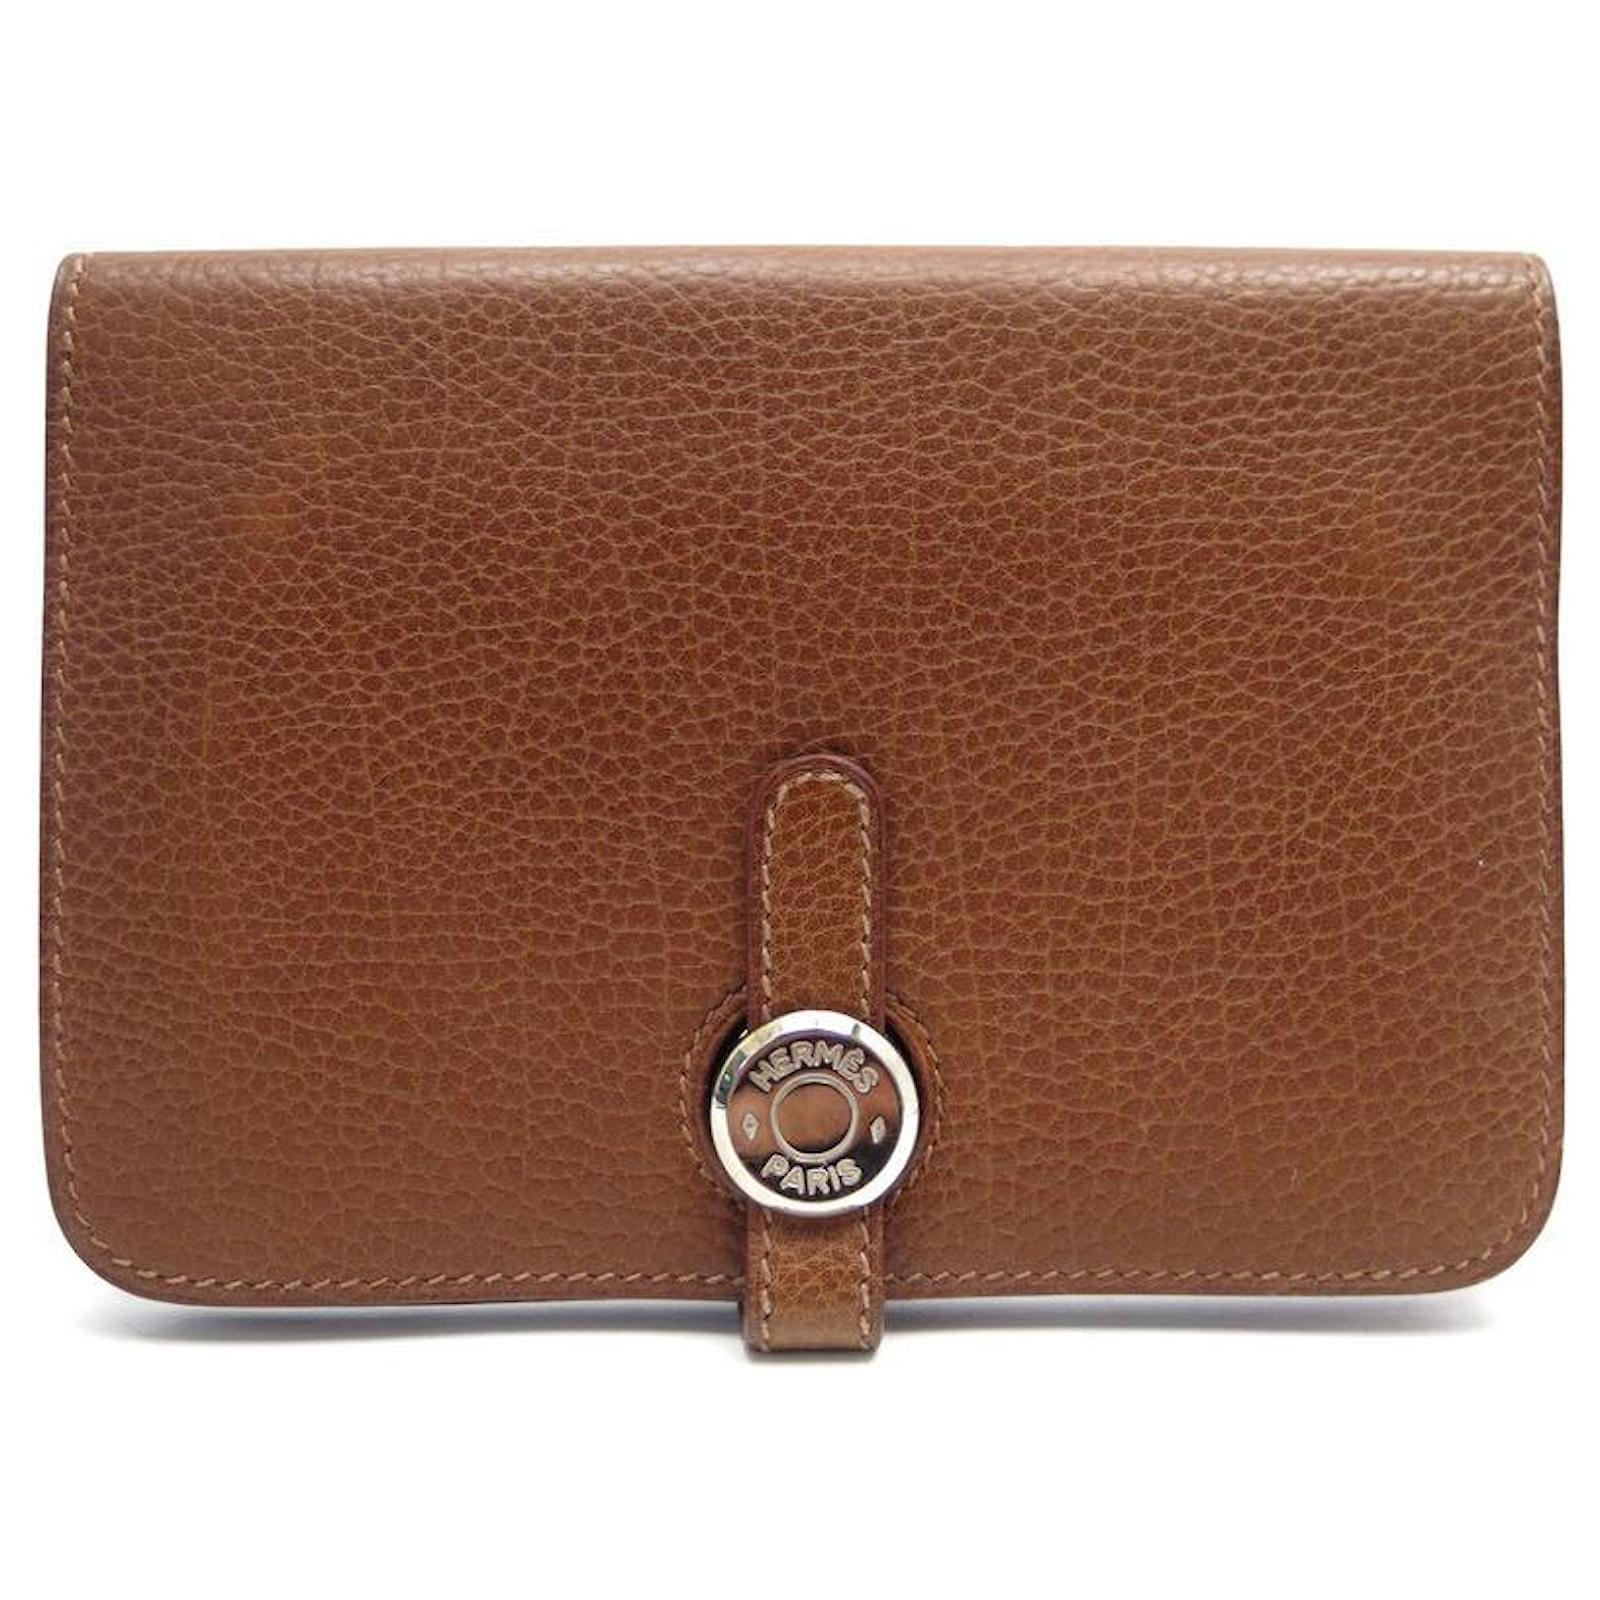 Hermès HERMES DOGON COMPACT WALLET IN BROWN GRAINED LEATHER BROWN